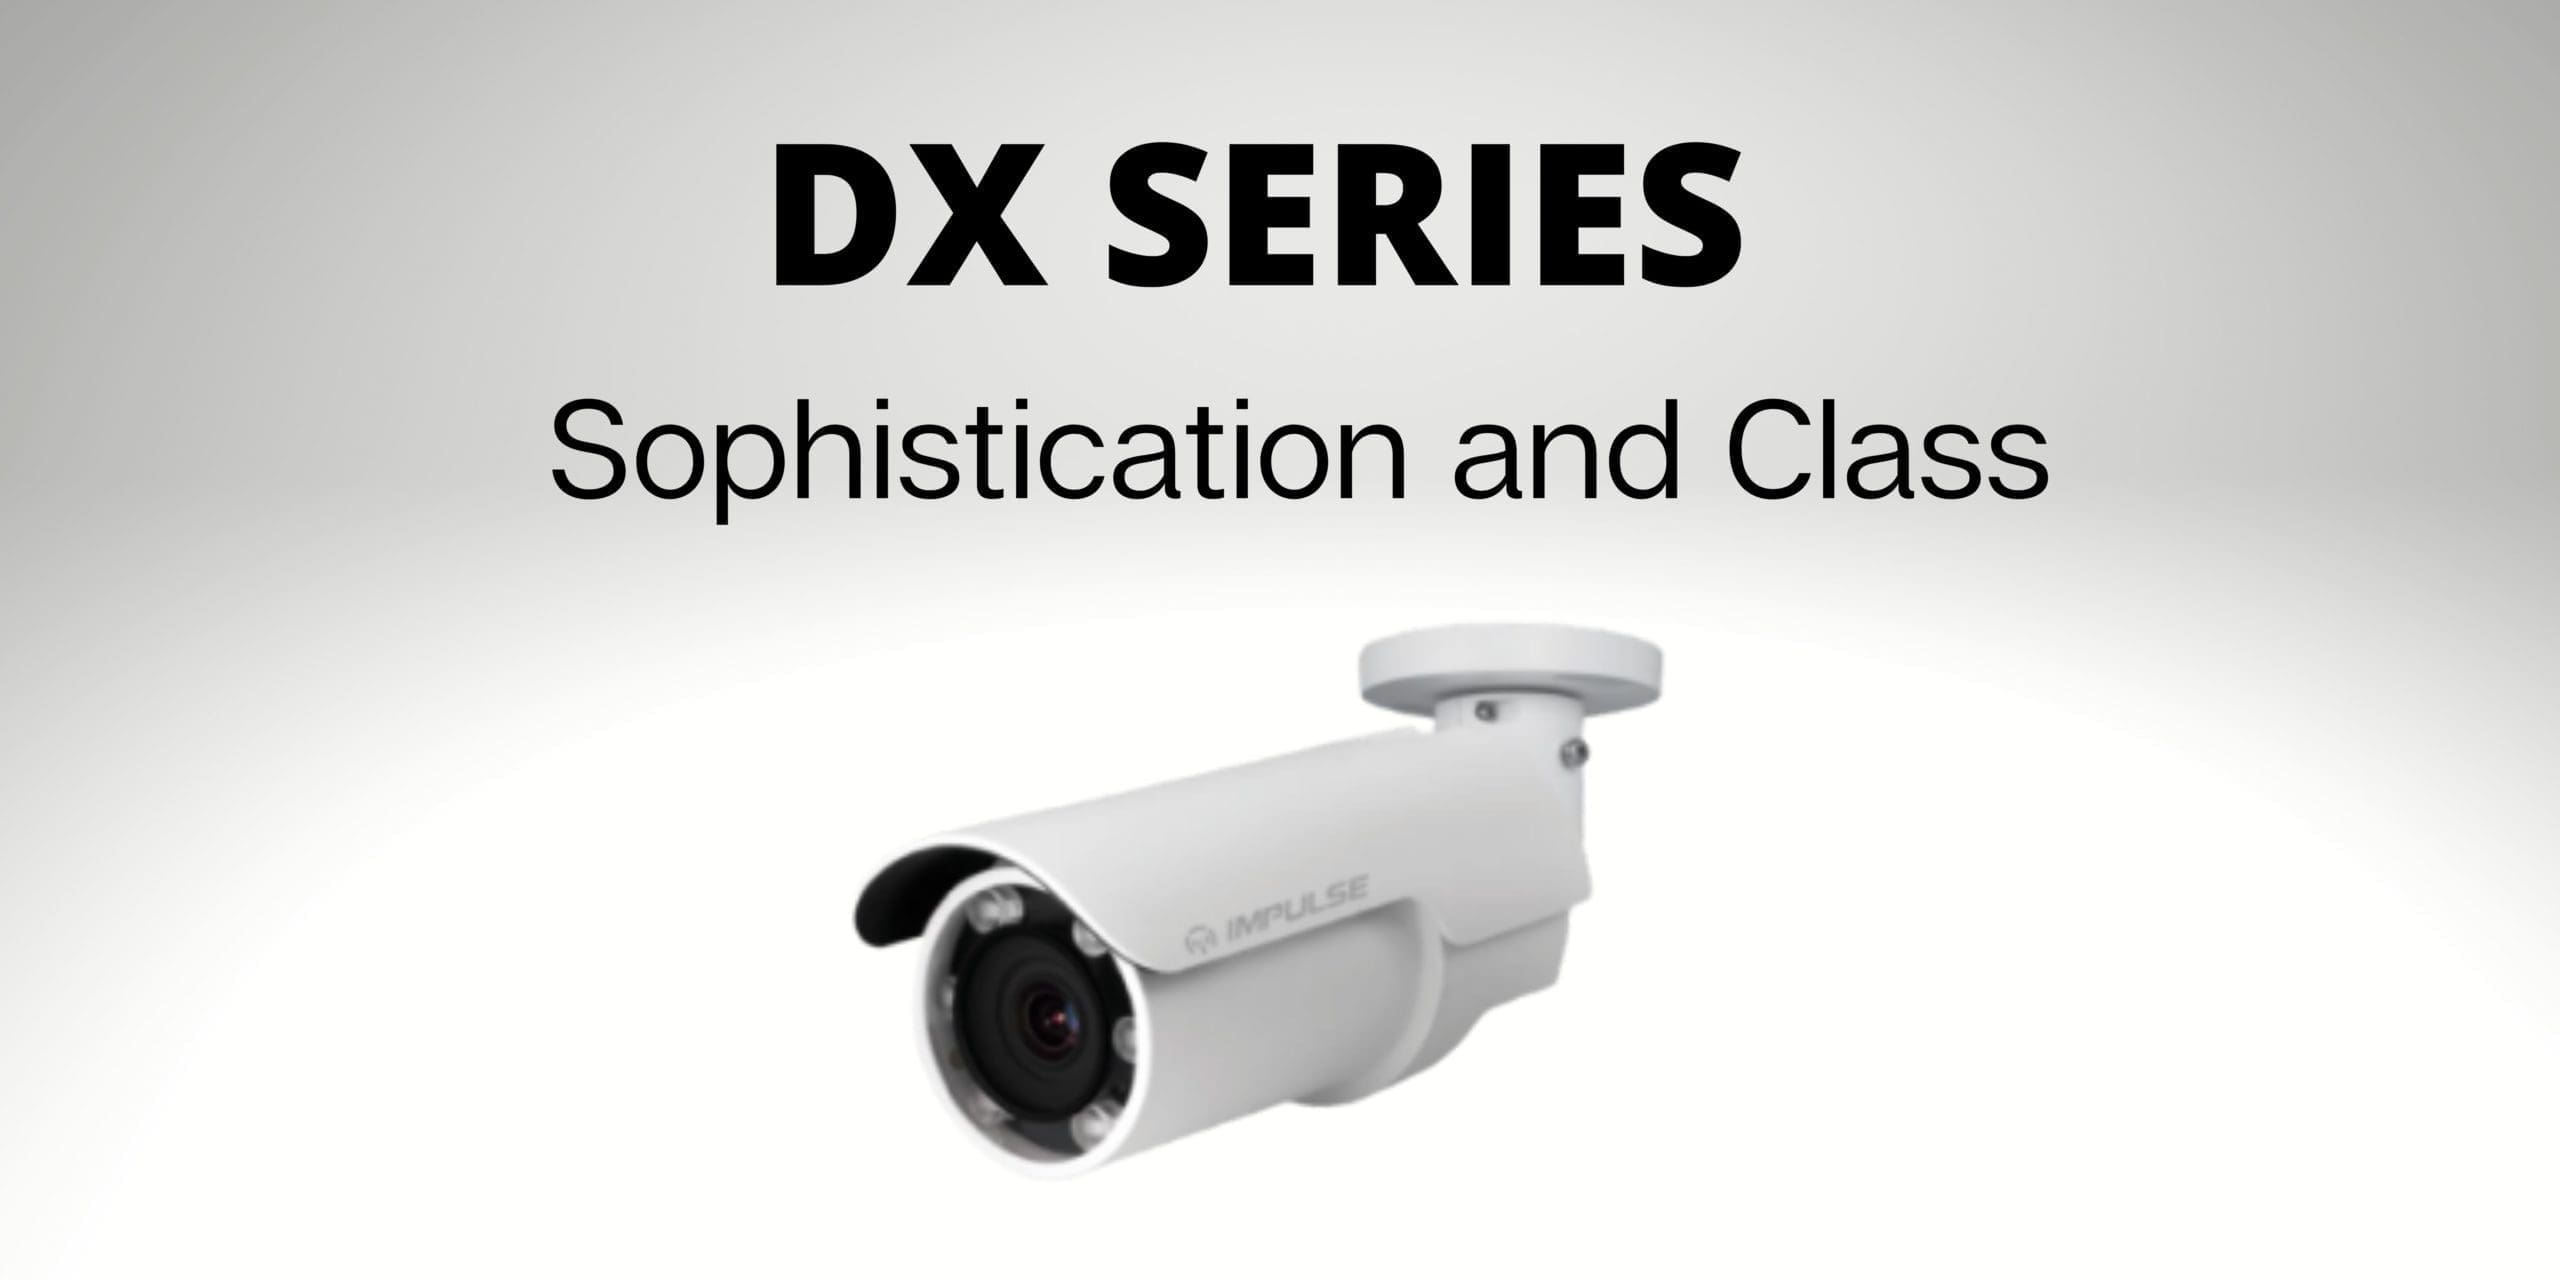 Impulse CCTV & PoE Switching l DX Series Bullet - Sophistication and Class